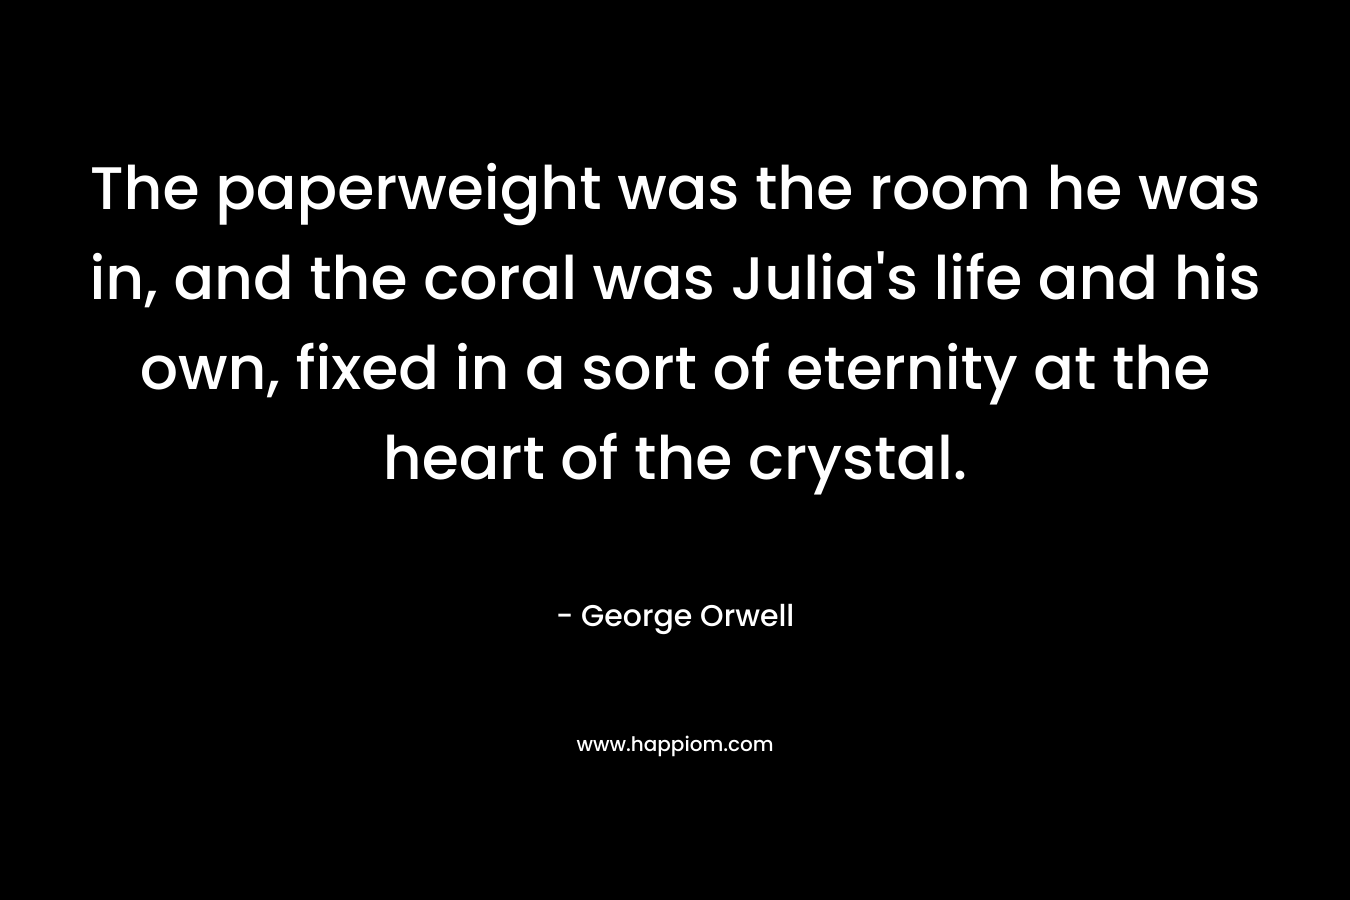 The paperweight was the room he was in, and the coral was Julia’s life and his own, fixed in a sort of eternity at the heart of the crystal. – George Orwell